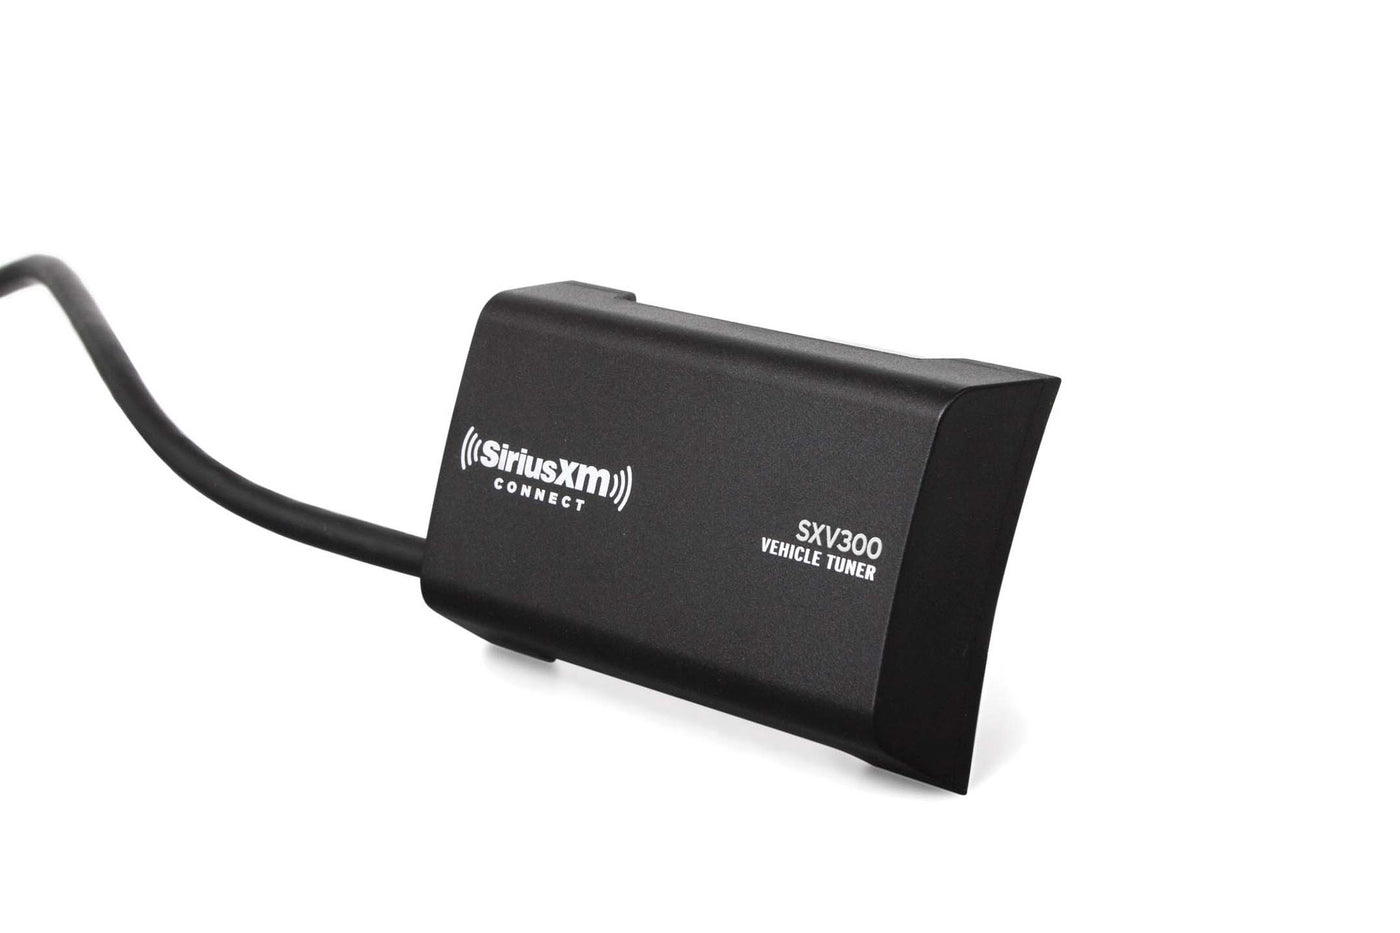 sxv300-siriusxm-connect-vehicle-tuner-free-after-rebate-hi-tech